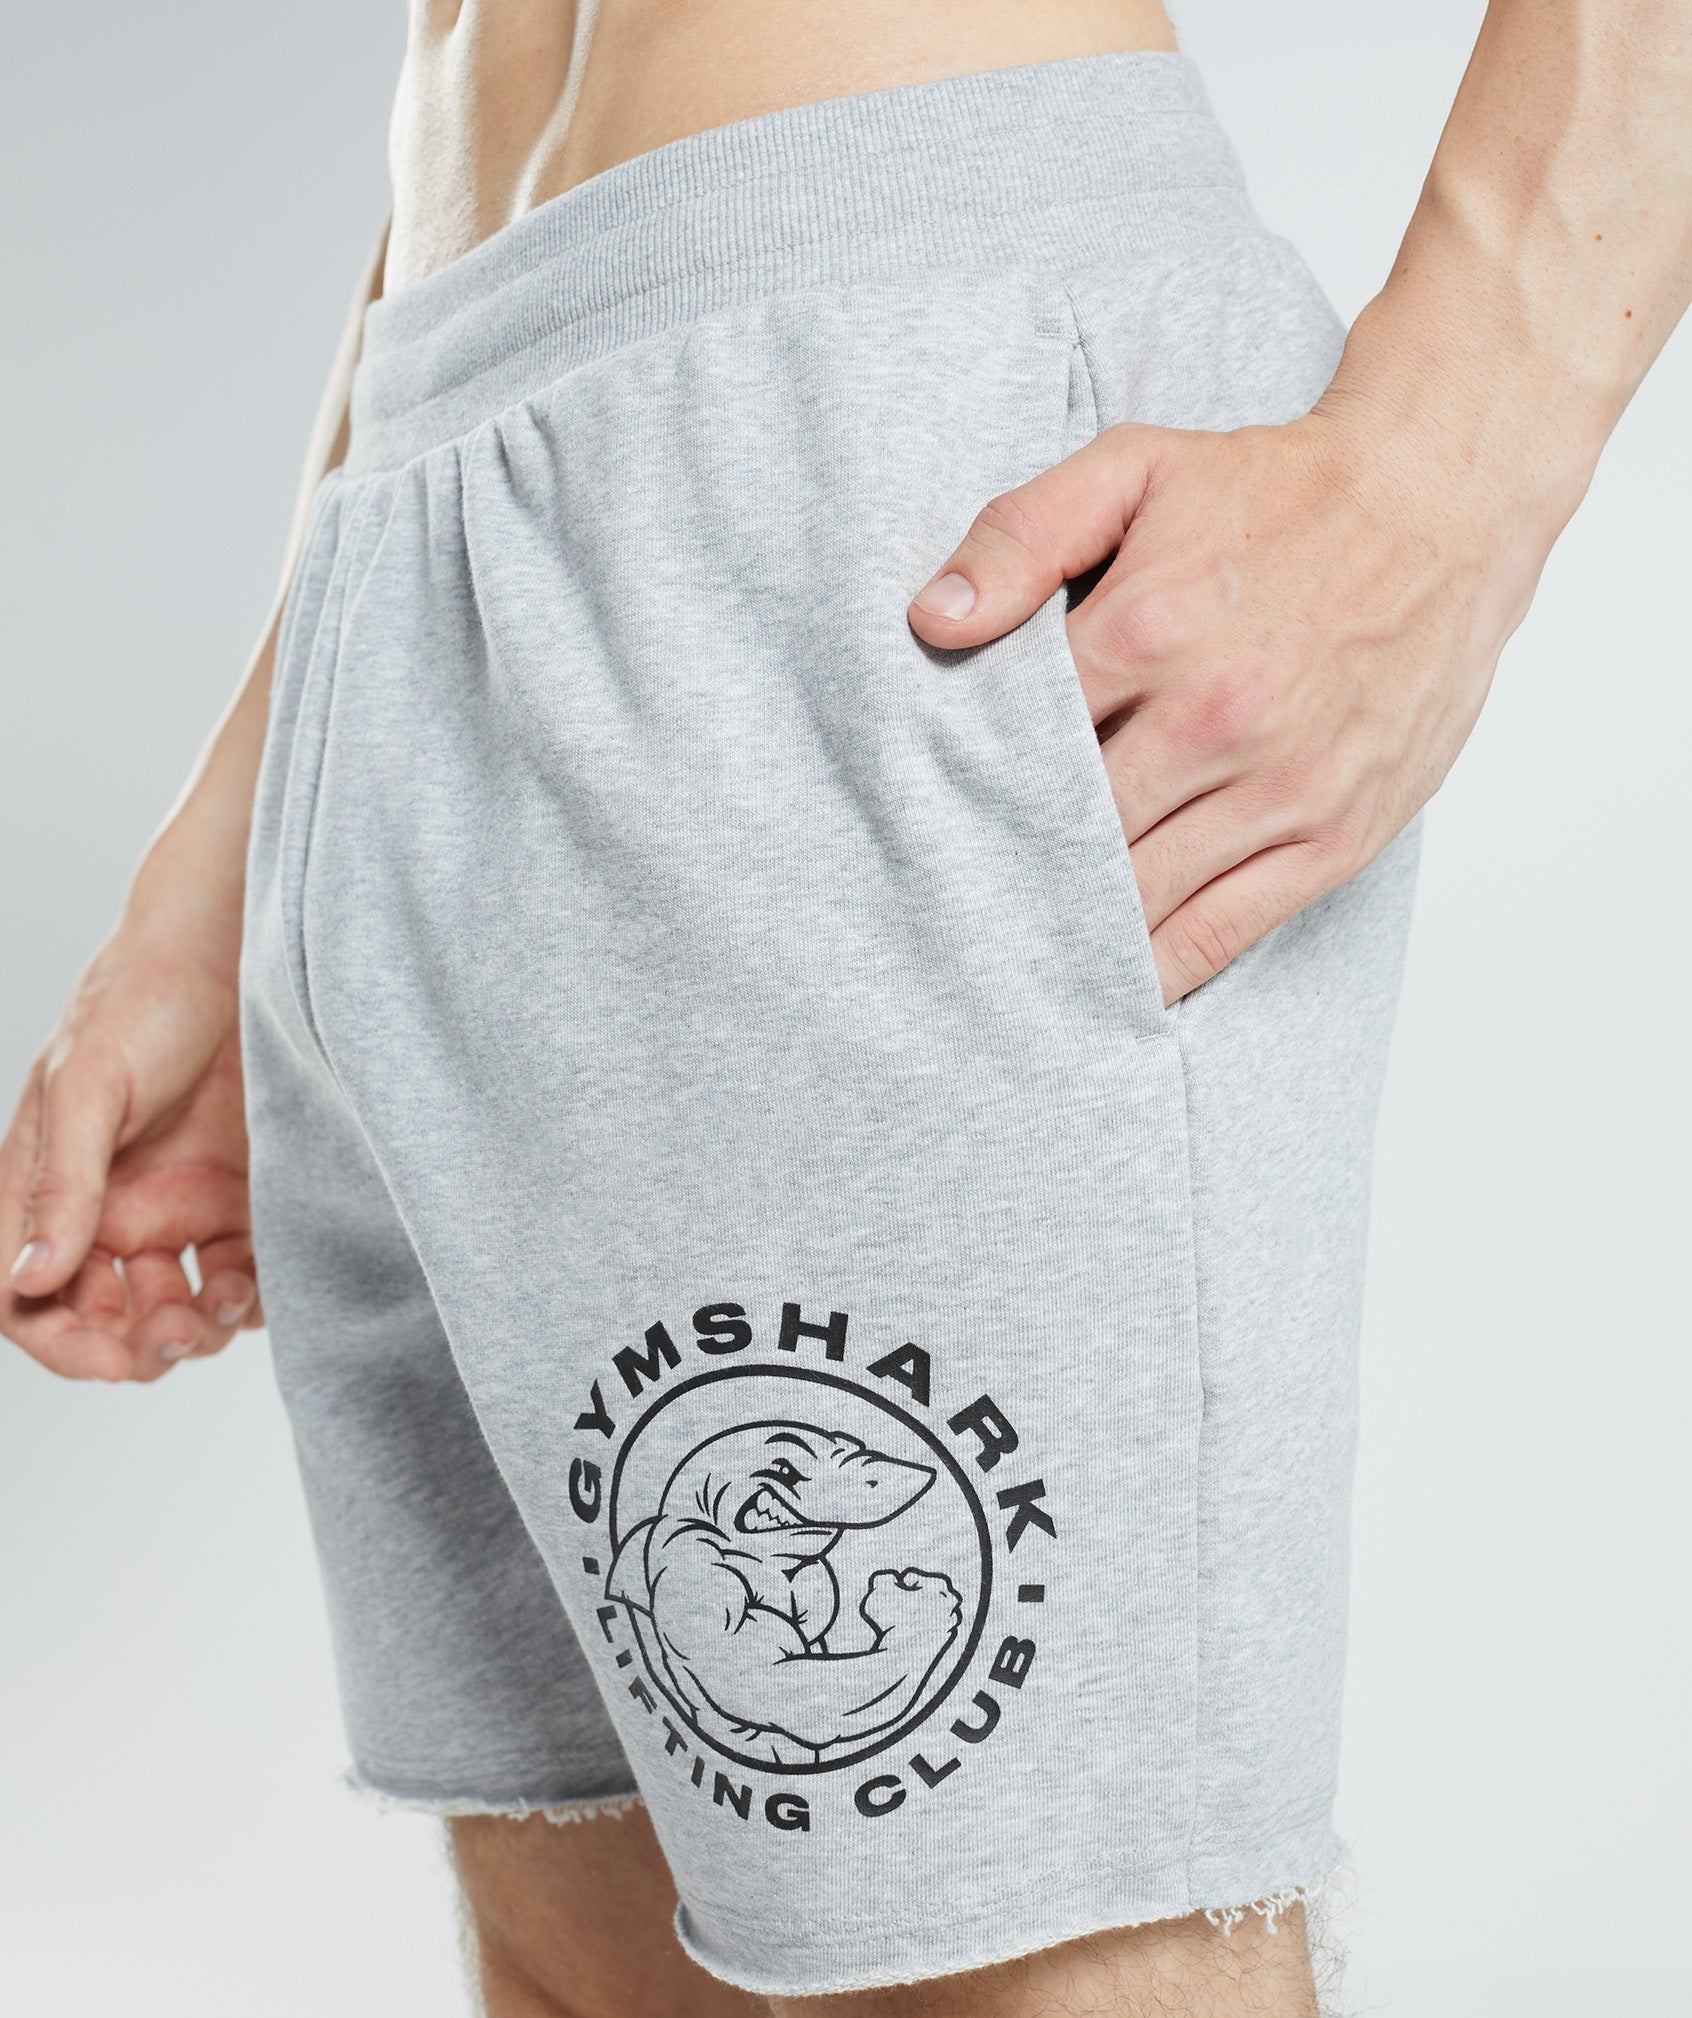 Legacy Shorts in Light Grey Core Marl - view 5